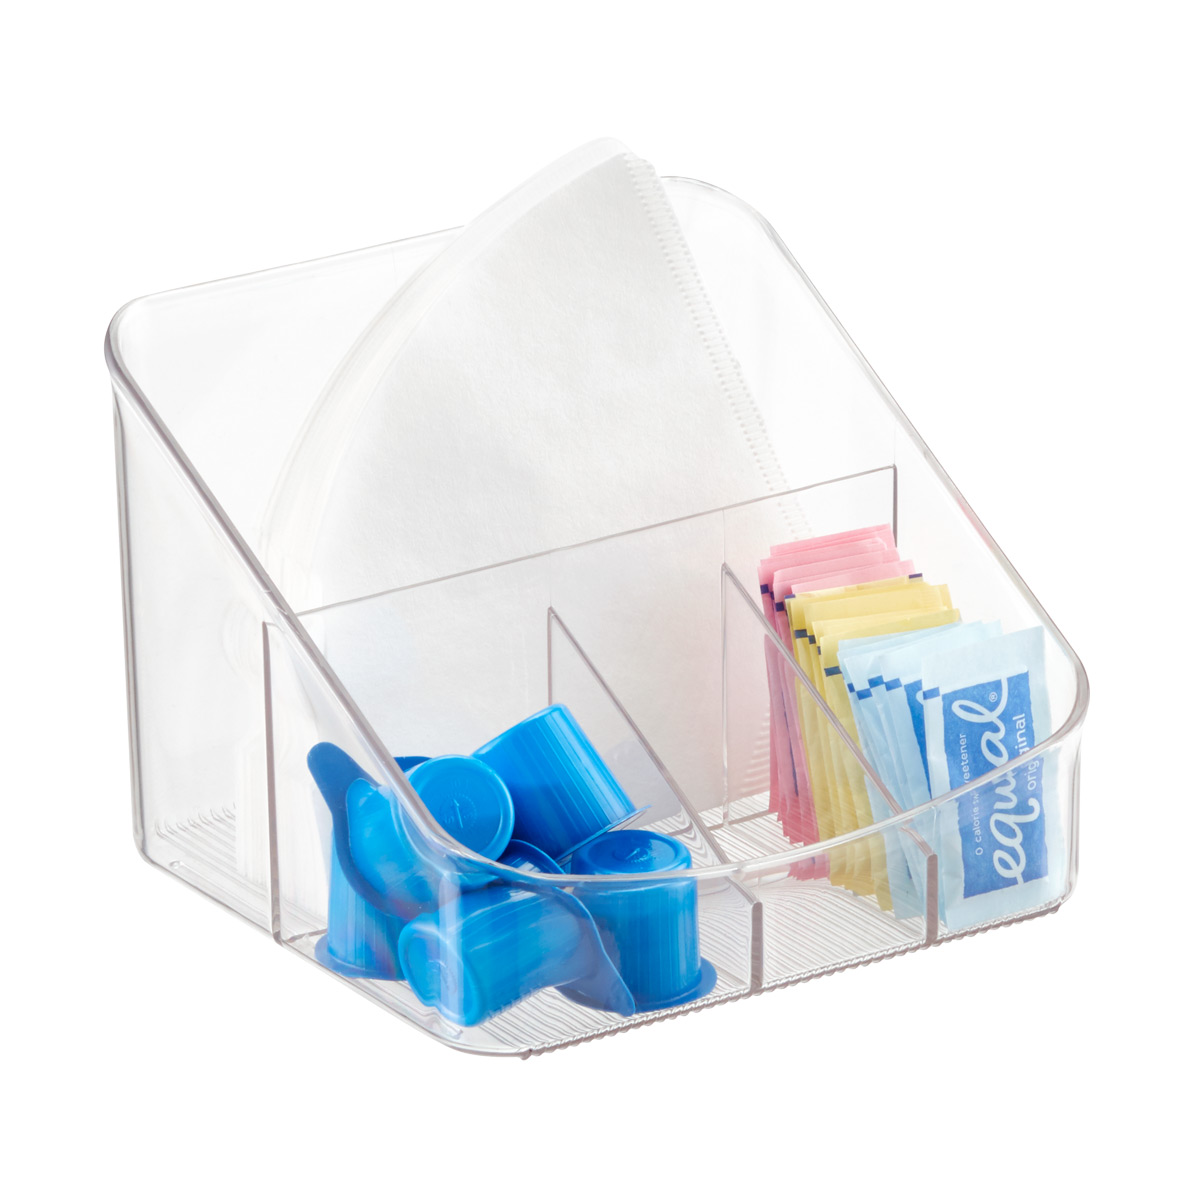 Coffee Station Organizer  (10) Compartments & Clear Acrylic Front